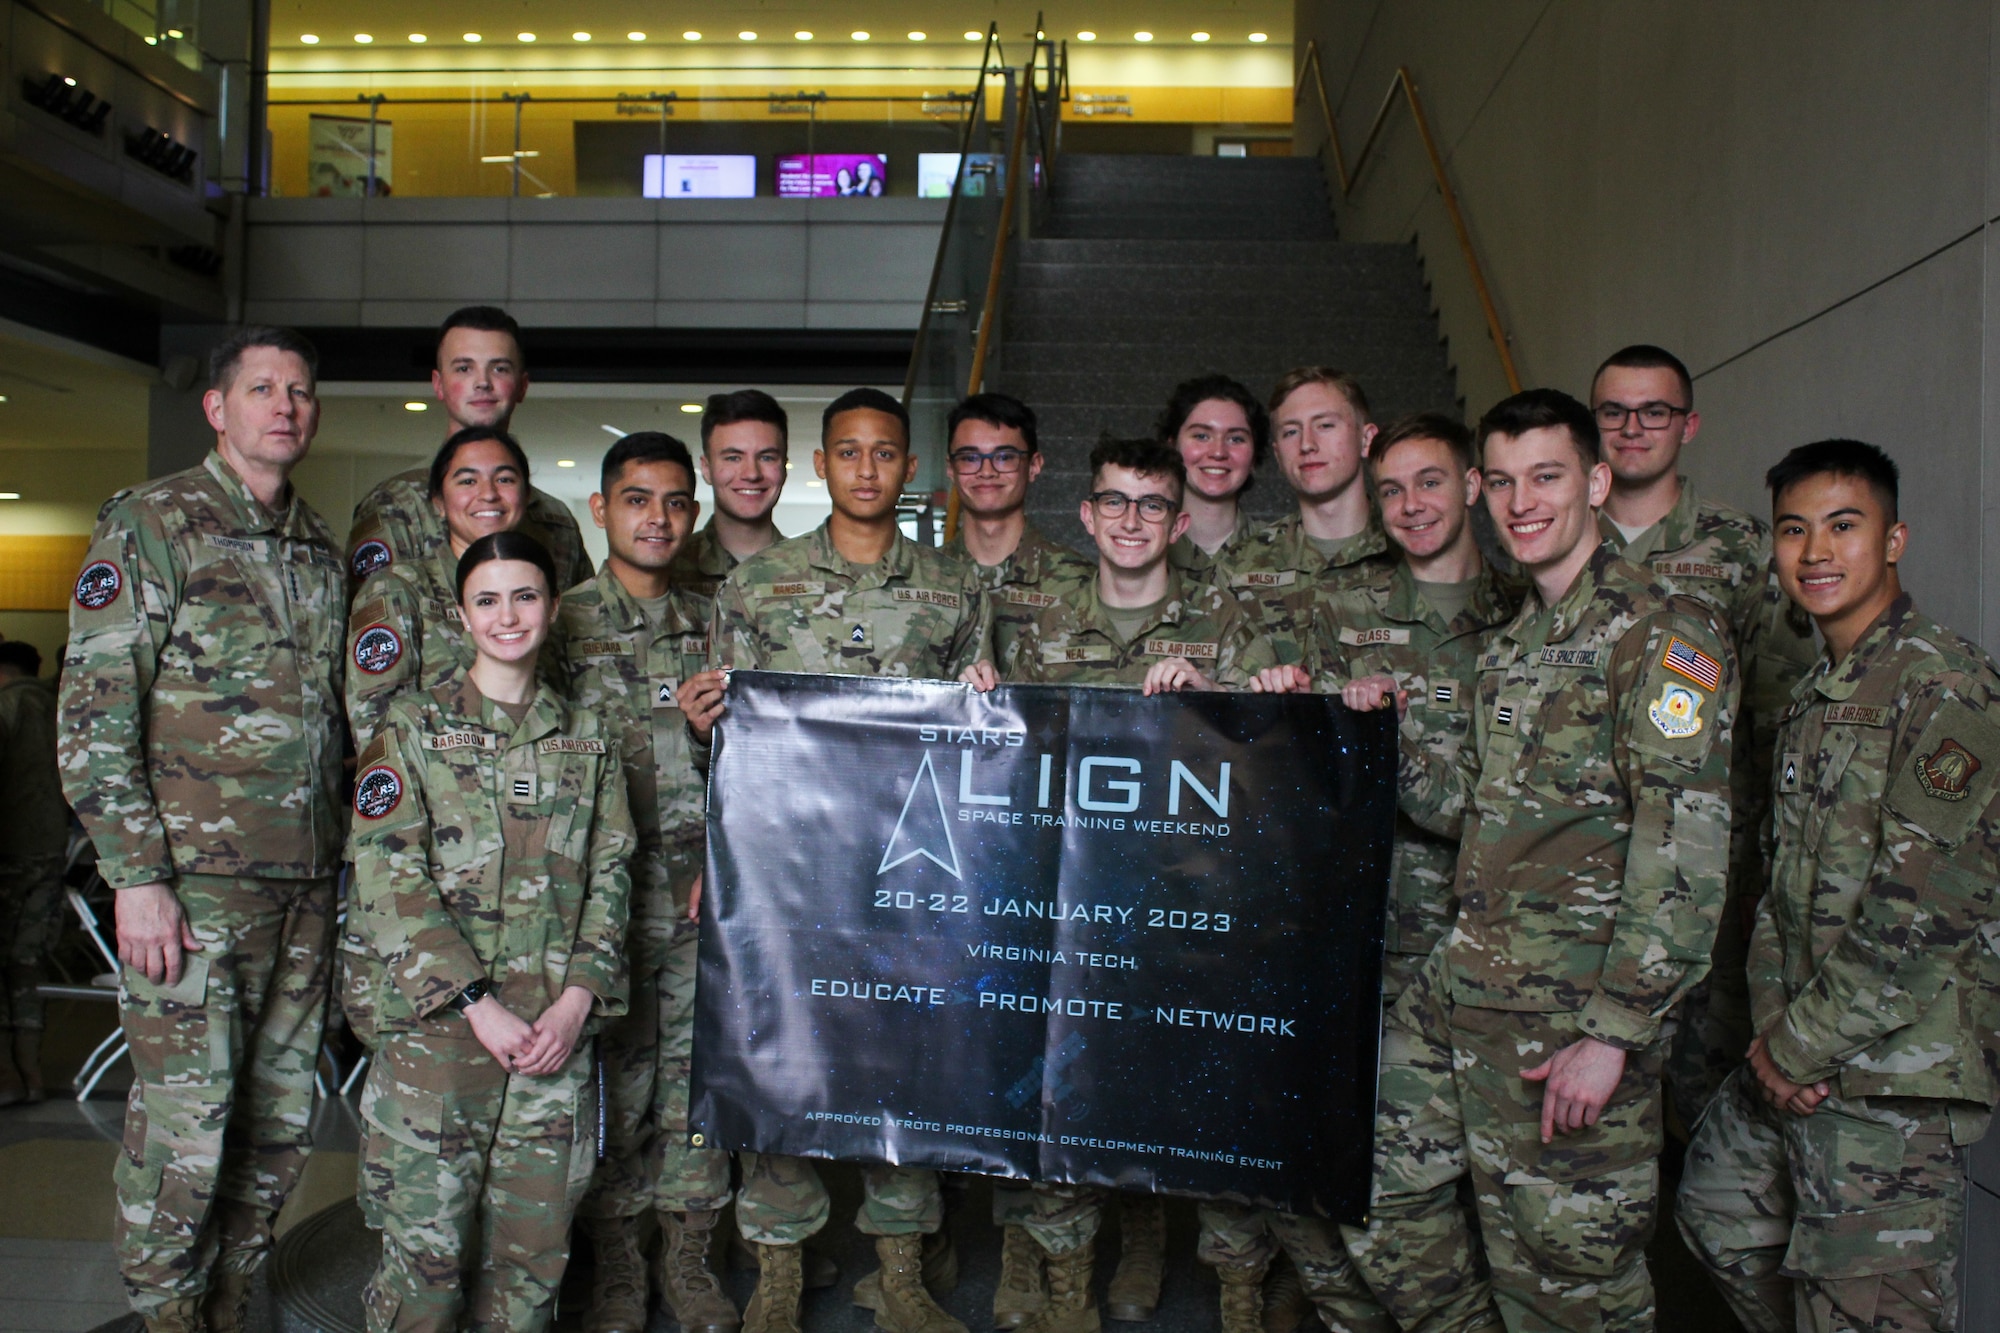 More than 150 cadets traveled from 27 detachments for the Space Training and Readiness Squadron (STARS) Align event focused on professional development, Jan. 20-22, 2023 at Virginia Tech.